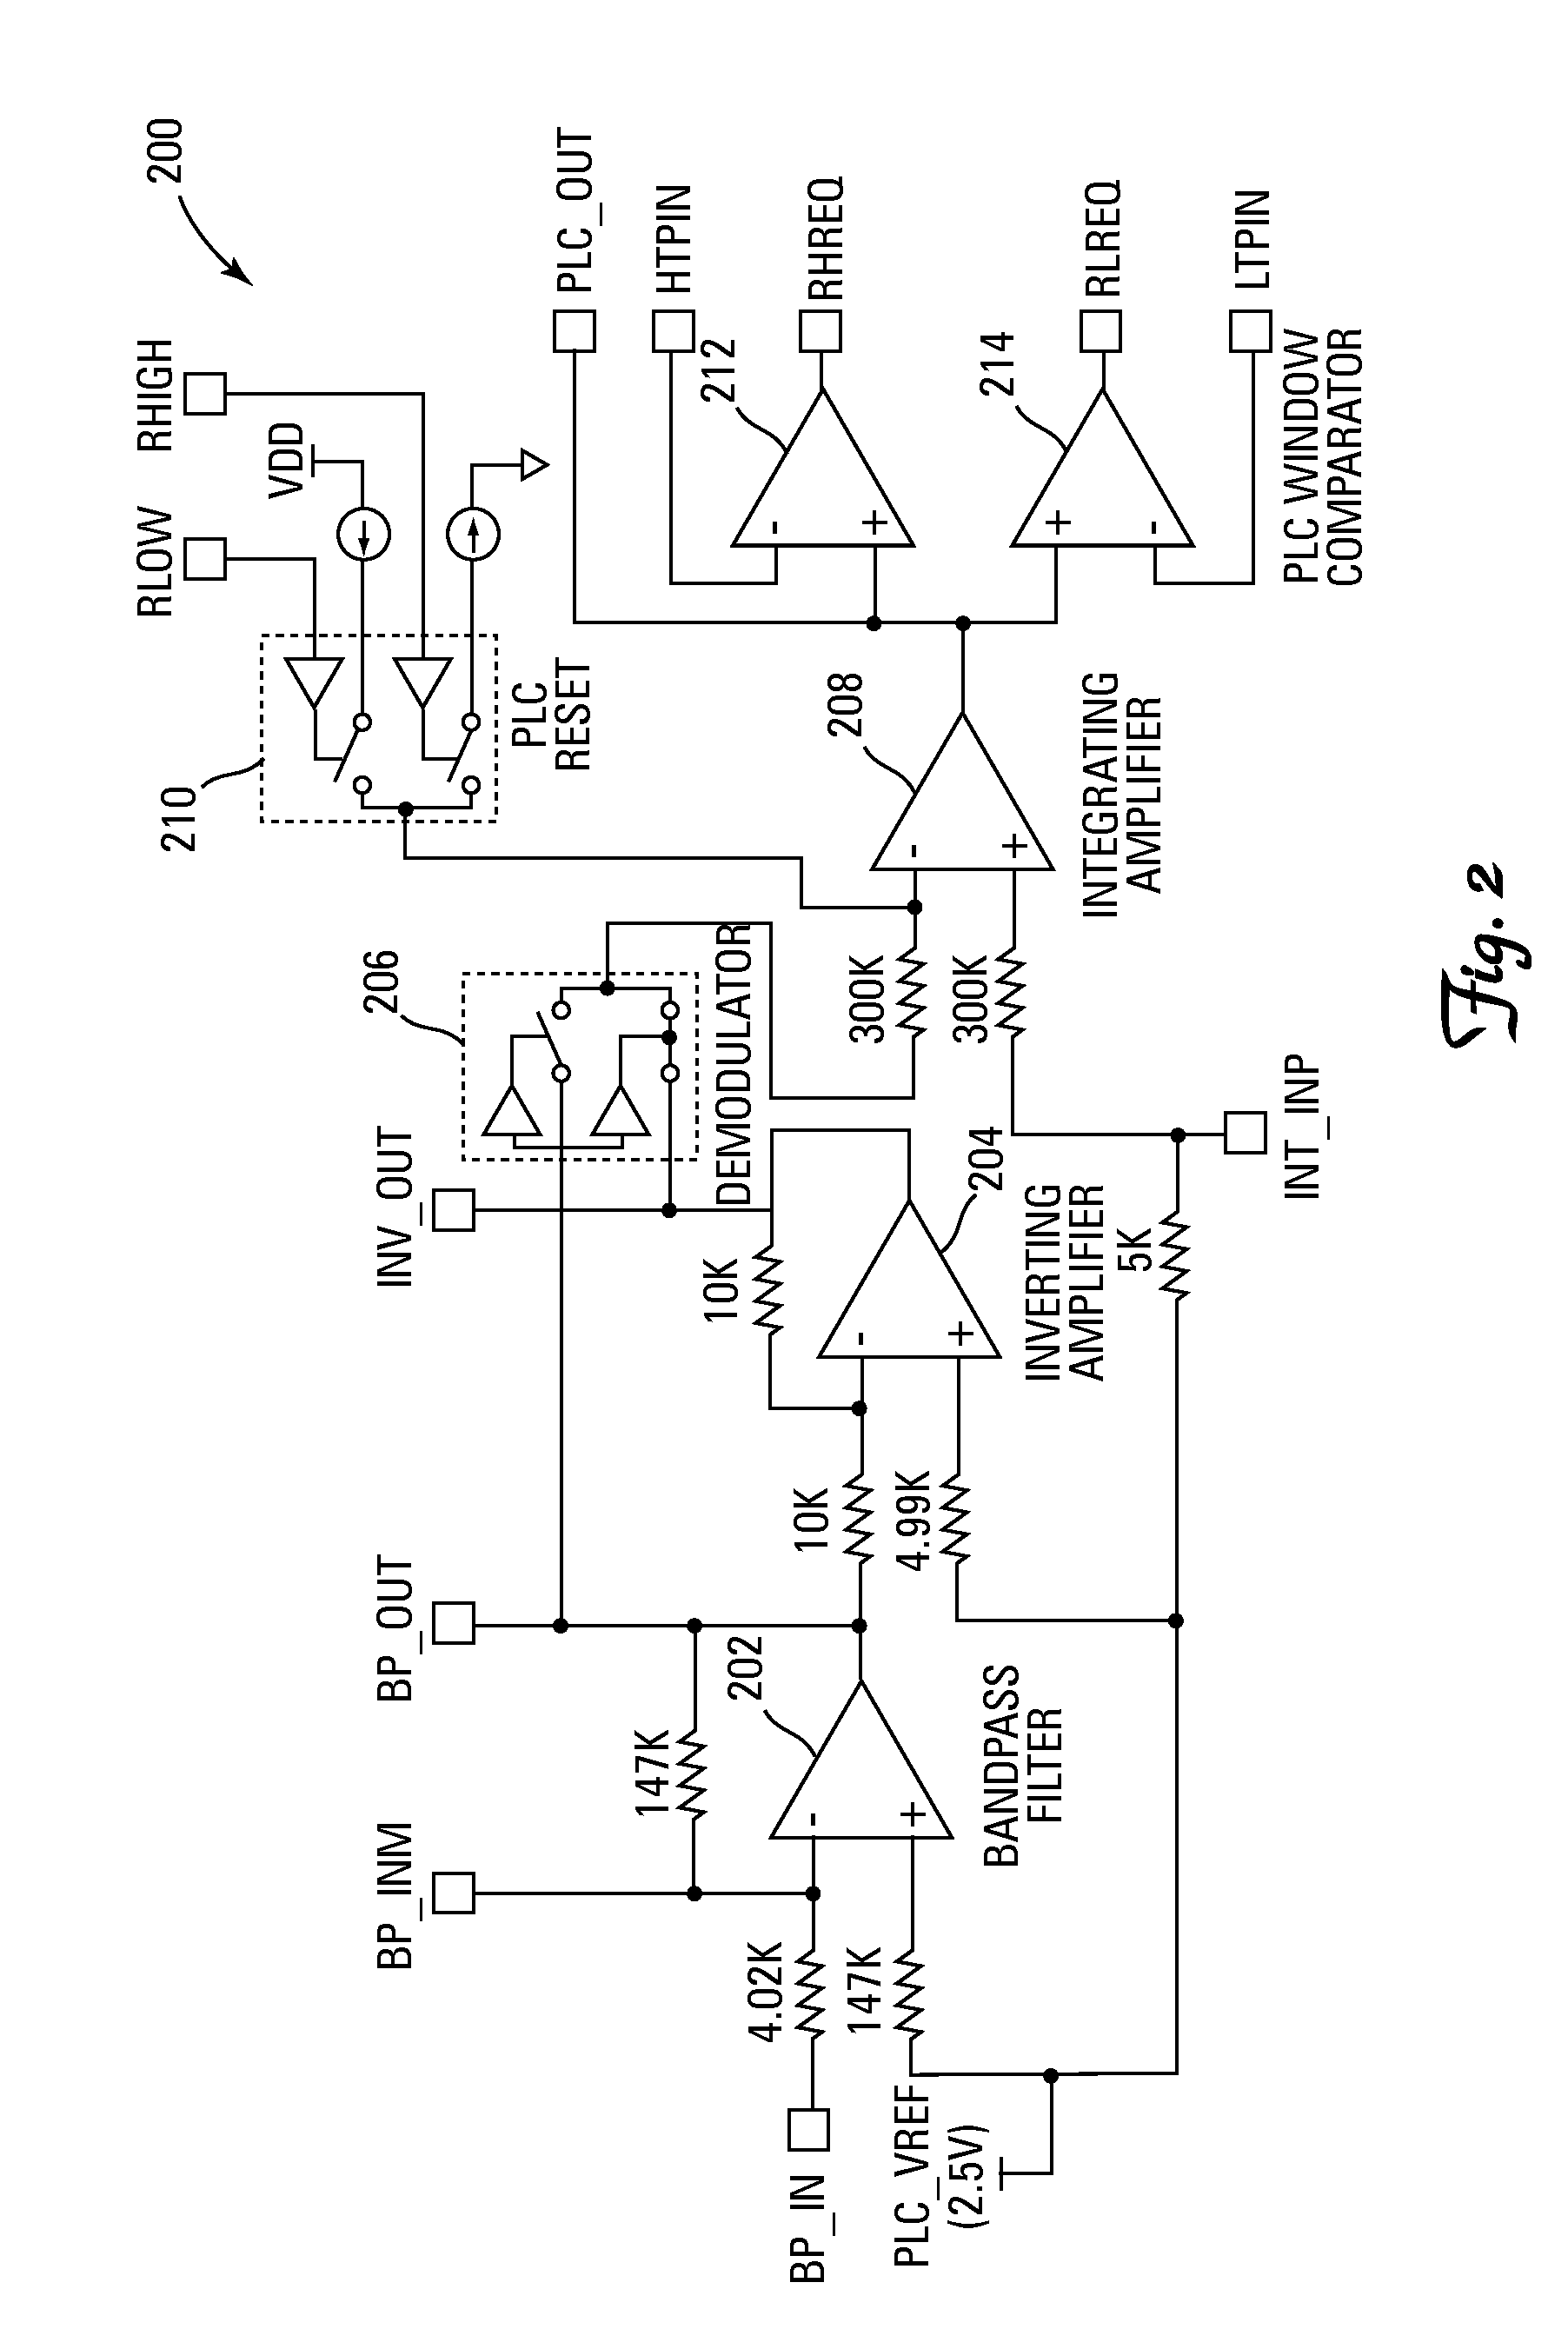 System, circuit and method for off-mode-peak operation of ring laser gyroscopes